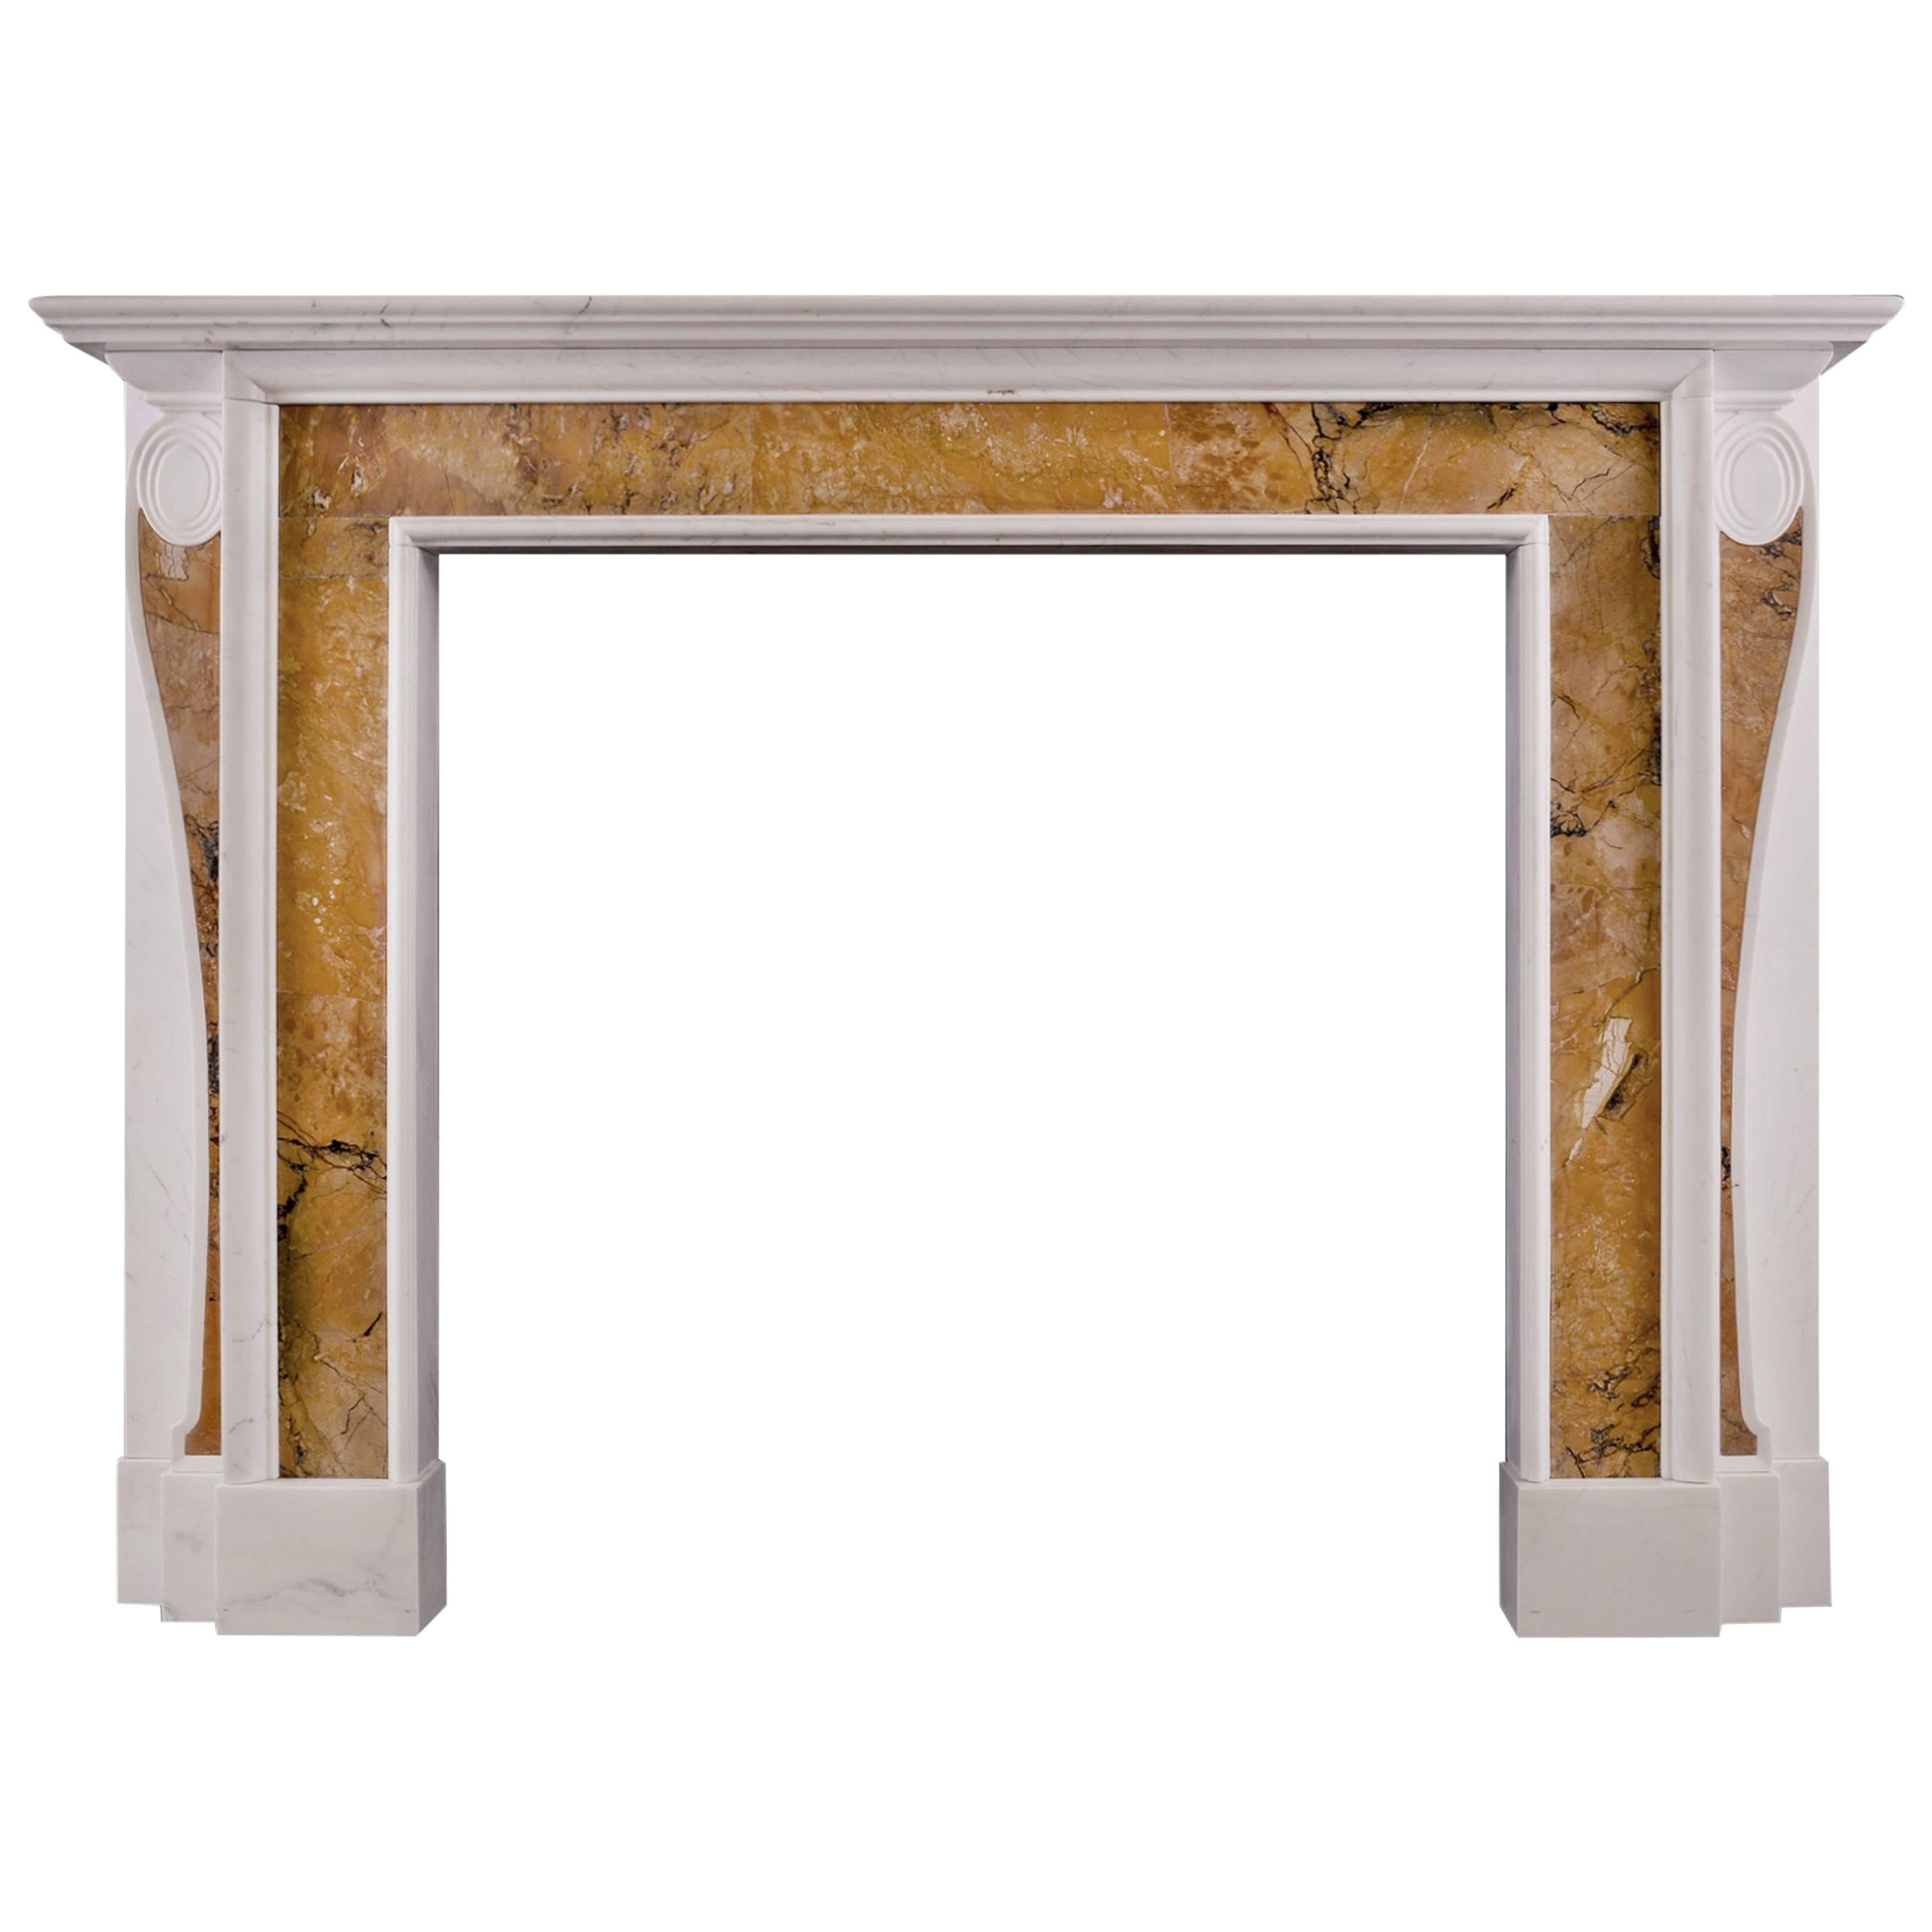 Georgian Style Fireplace with Inlaid Sienna Marble  For Sale